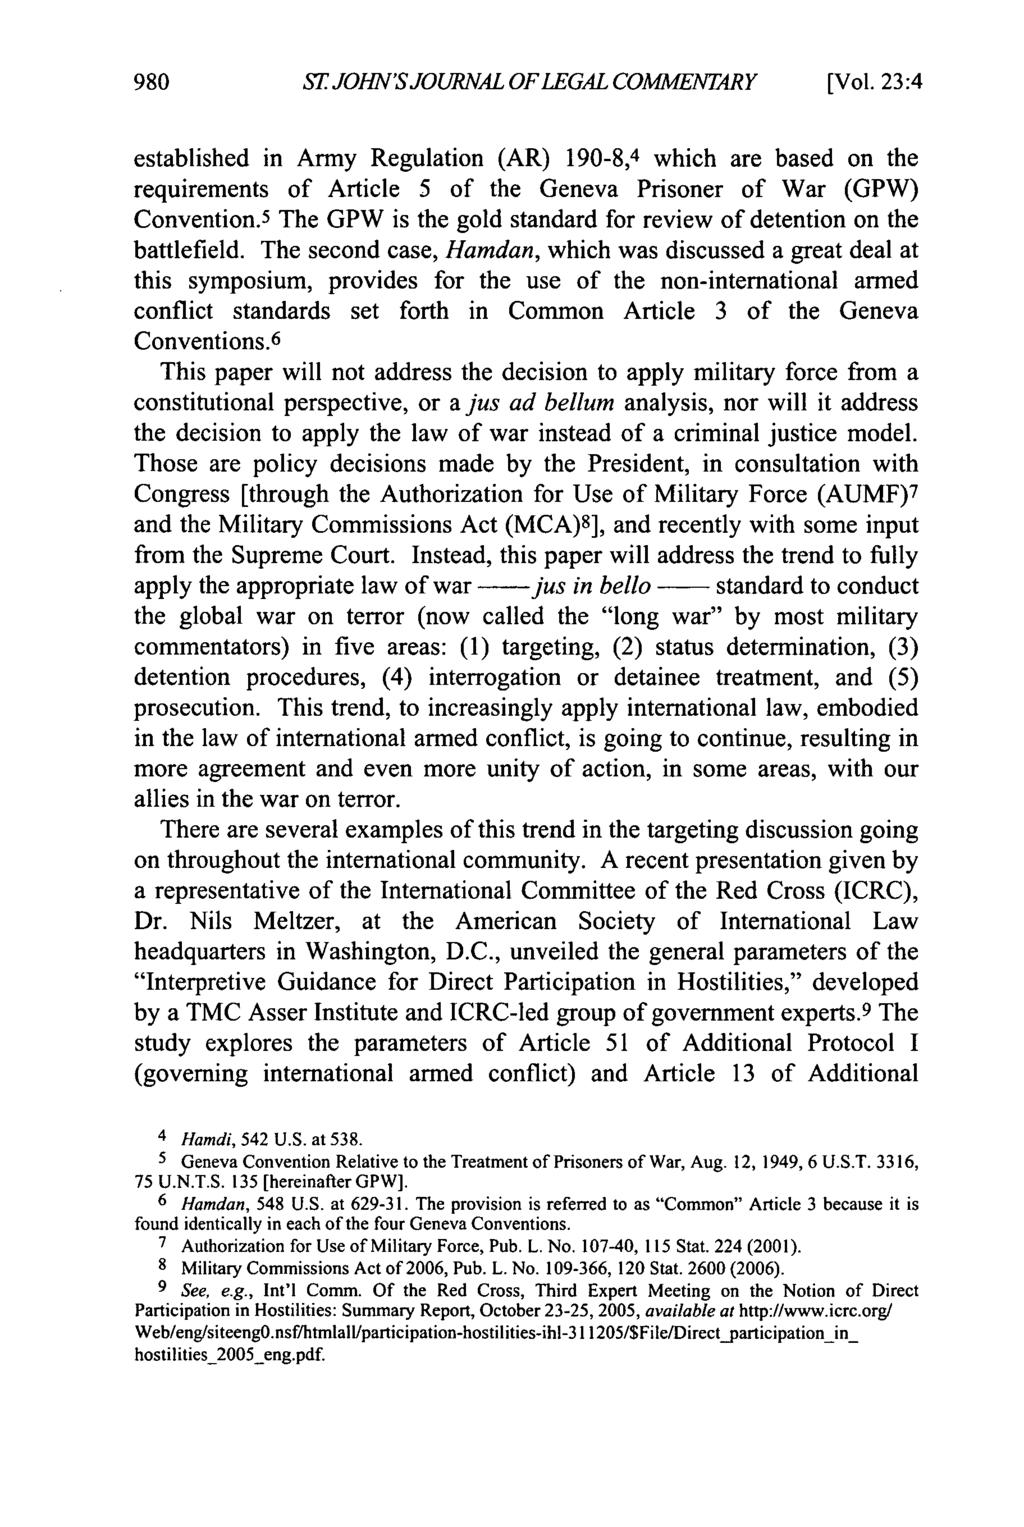 ST JOHN'S JOURNAL OFLEGAL COMMENTARY [Vol. 23:4 established in Army Regulation (AR) 190-8,4 which are based on the requirements of Article 5 of the Geneva Prisoner of War (GPW) Convention.